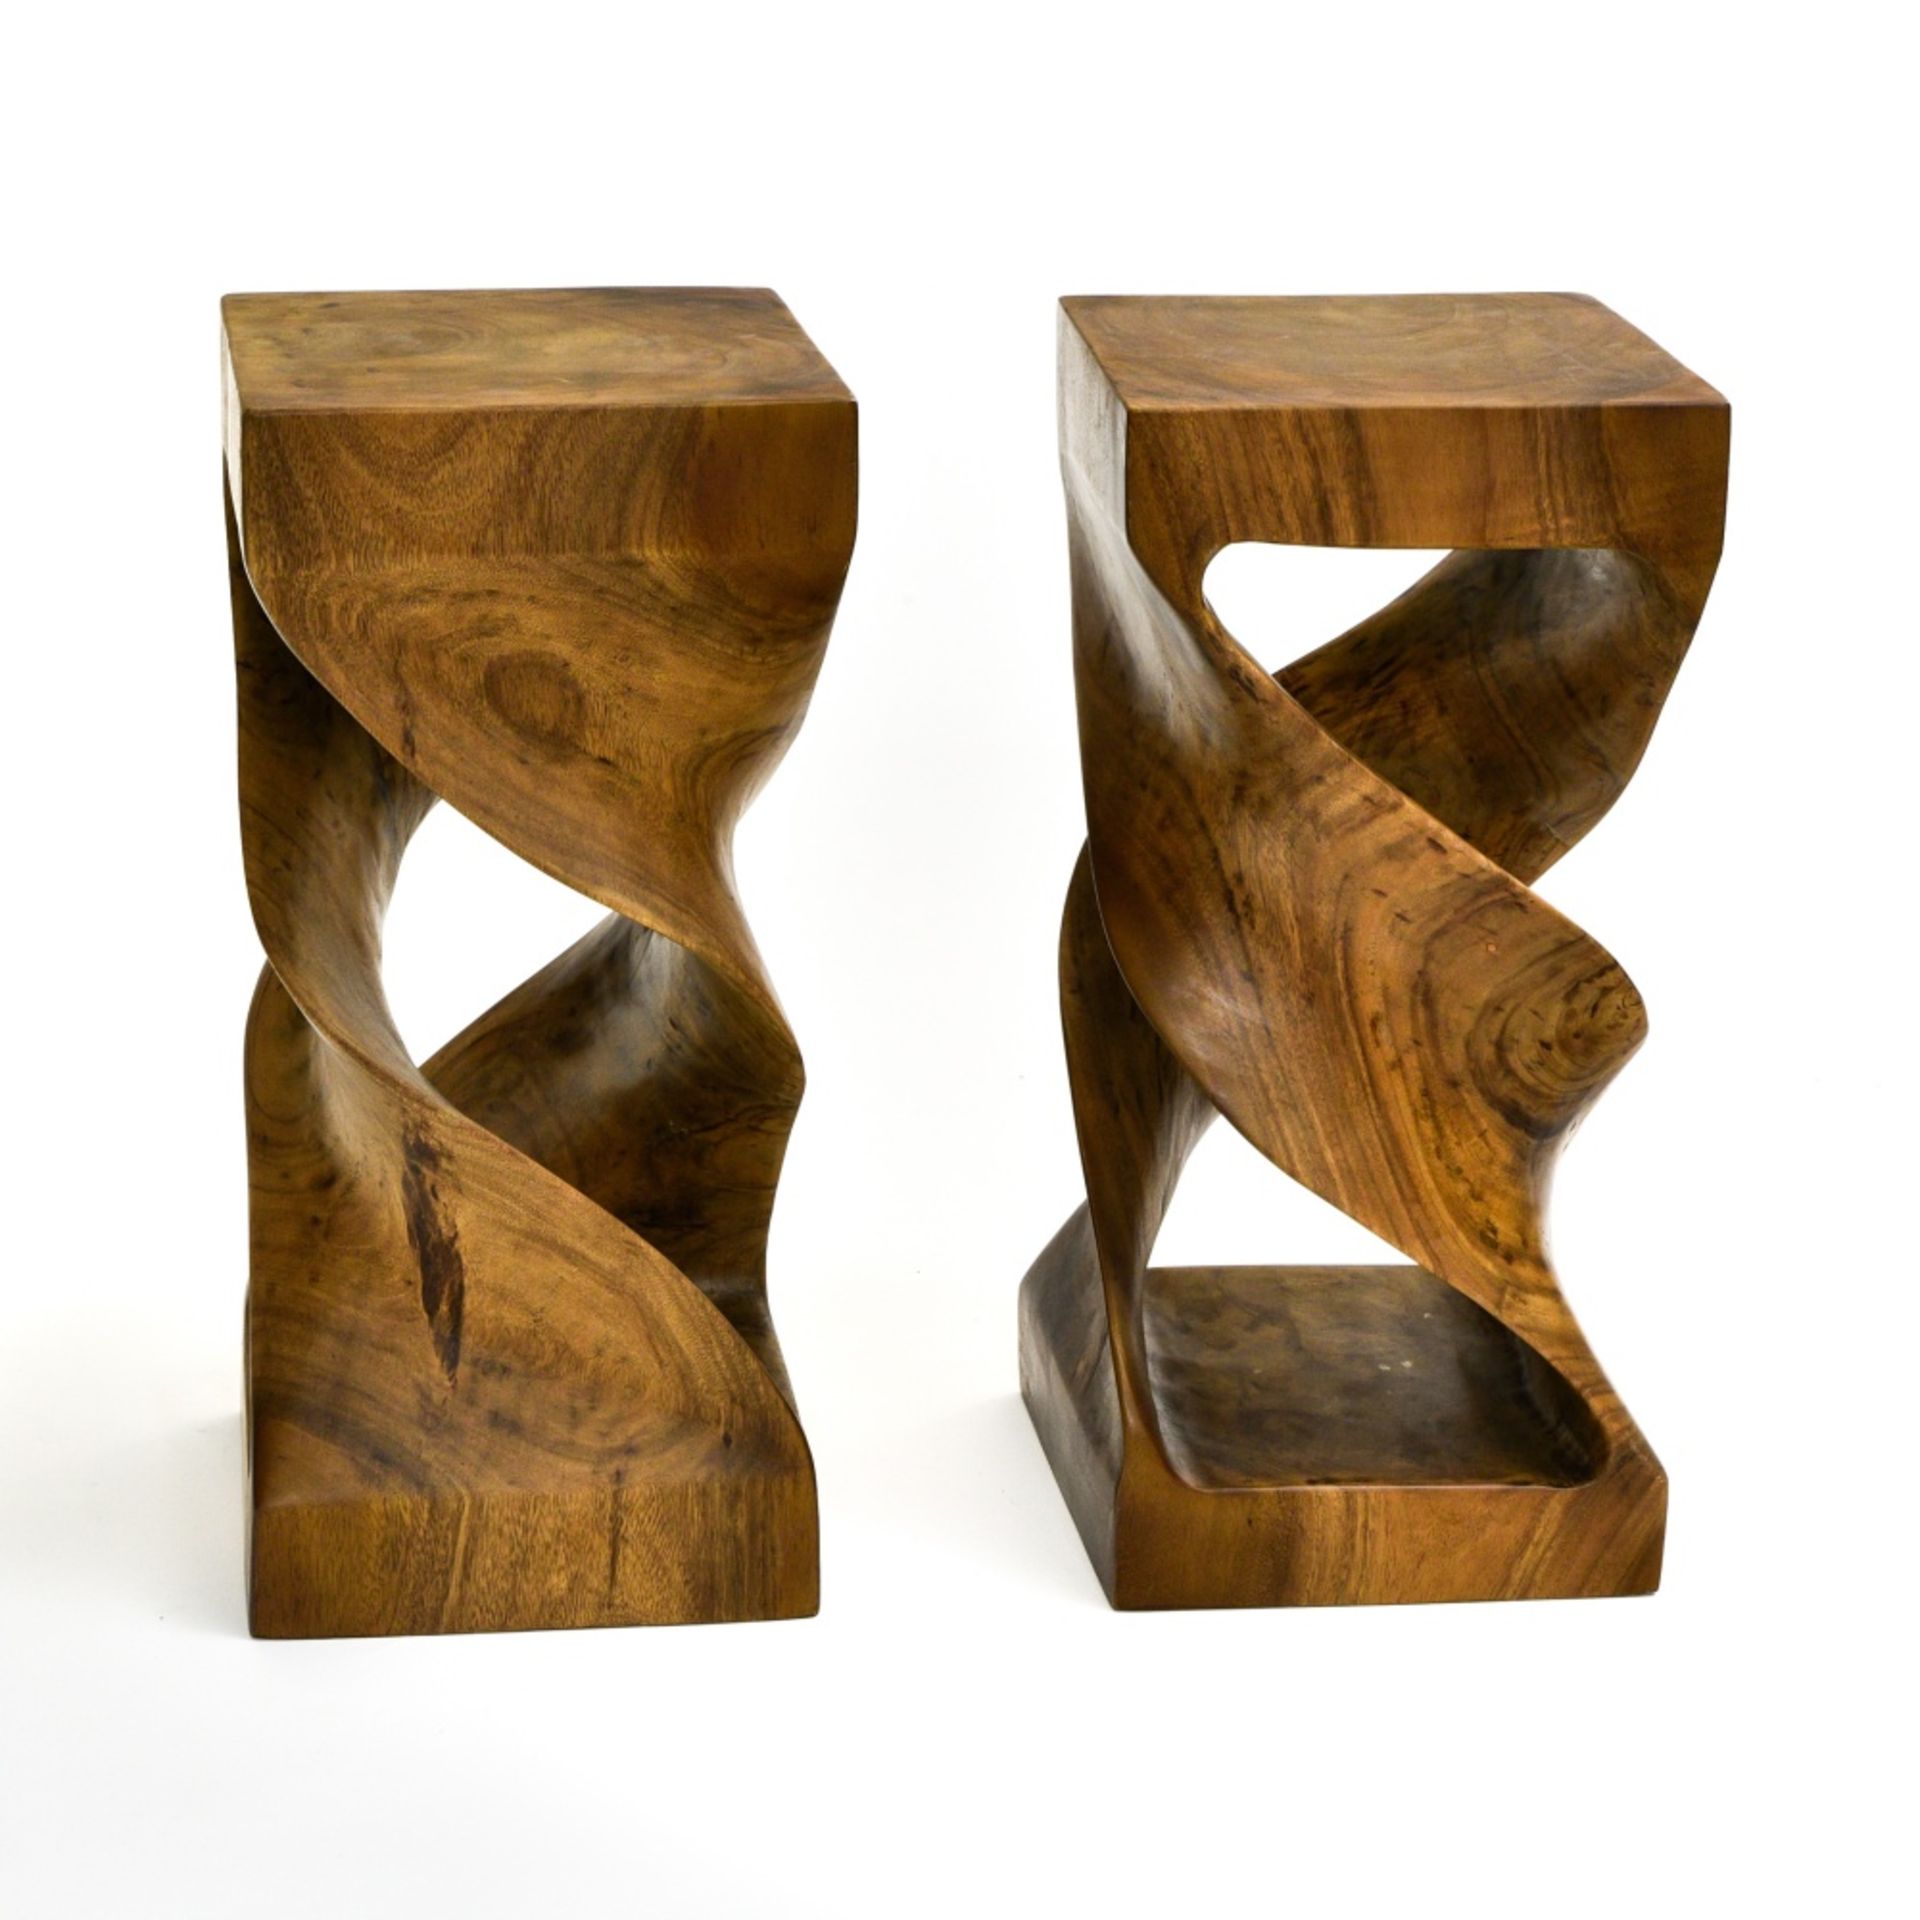 Olivier de SCHRIJVER (Born in 1958) Pair of twisted columns, Carved and hollowed rain tree wood.